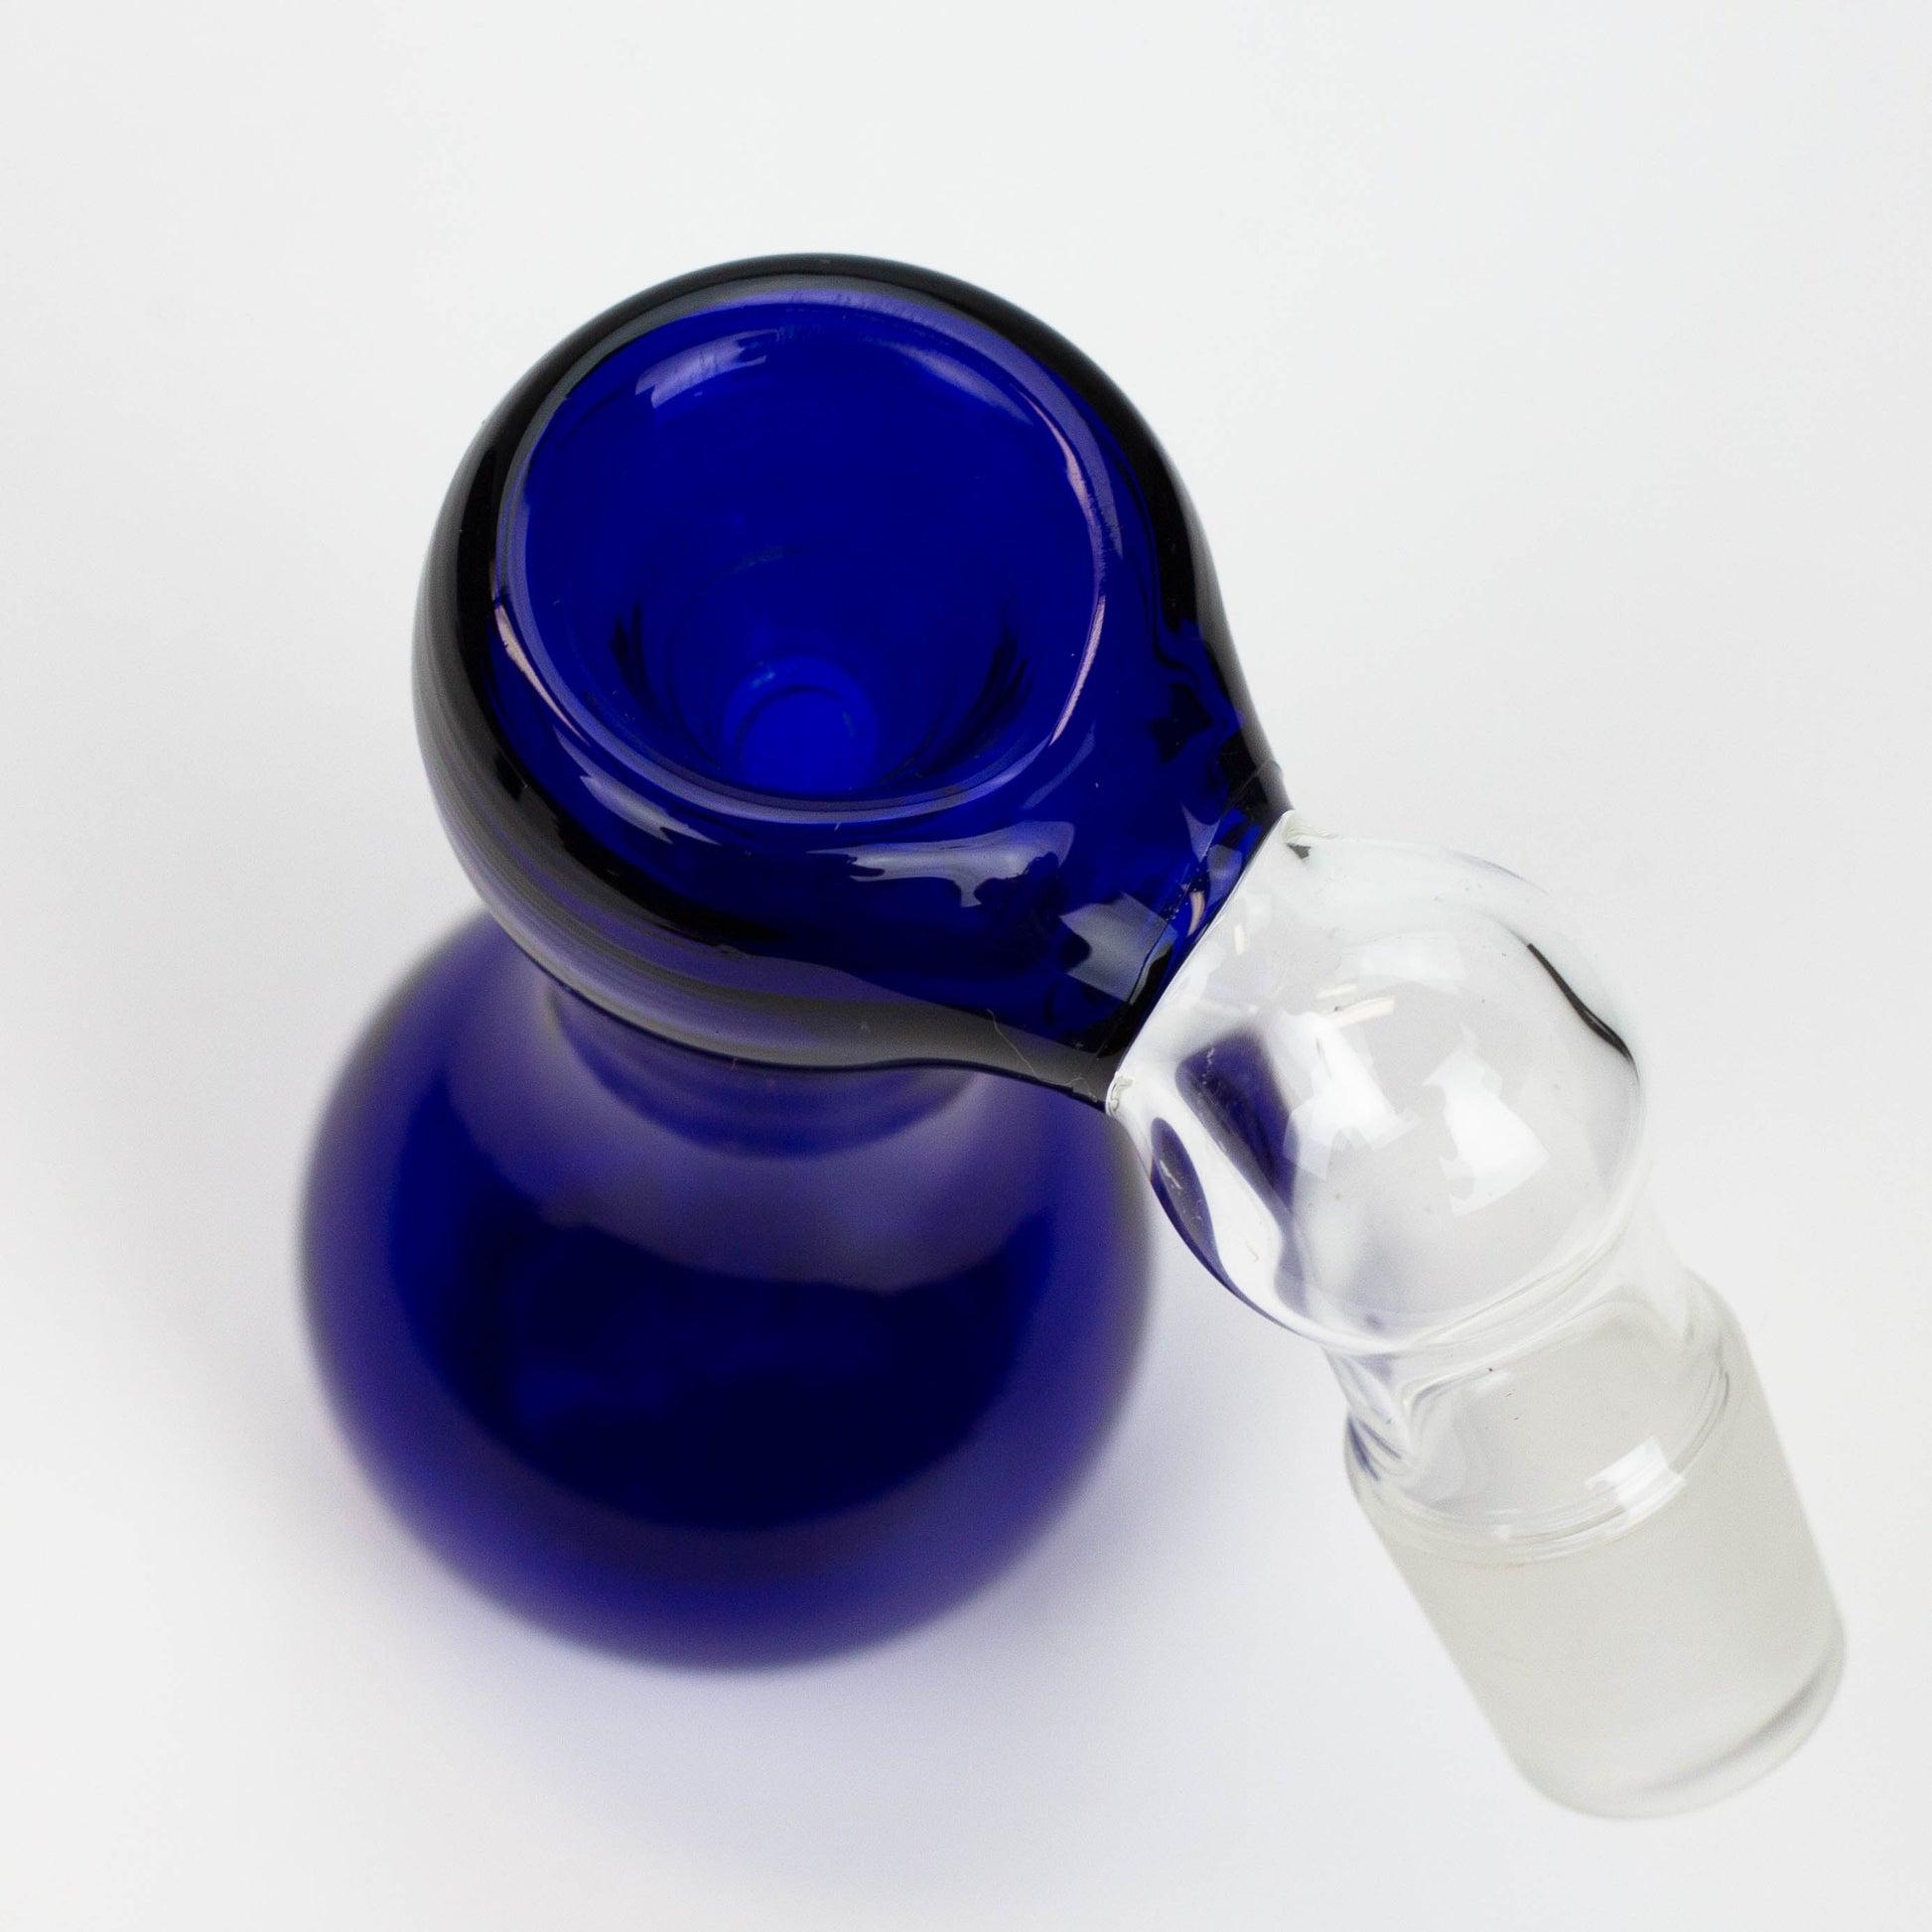 Blue Type-B ash catcher for 18mm female Joint_1